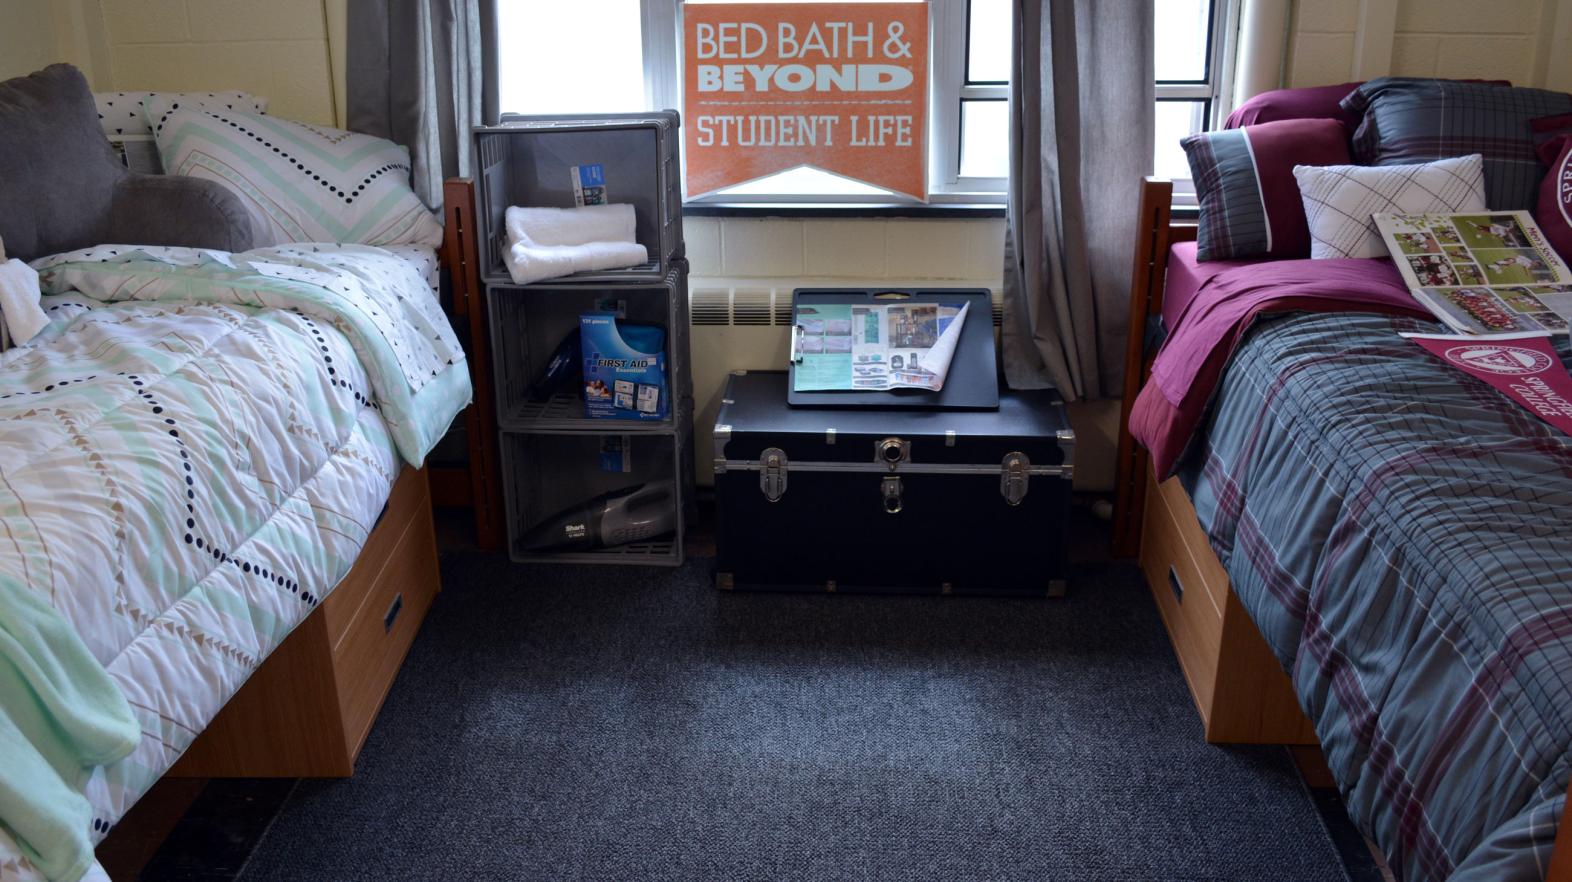 A room in Massasoit Hall with two beds and desk area for students.